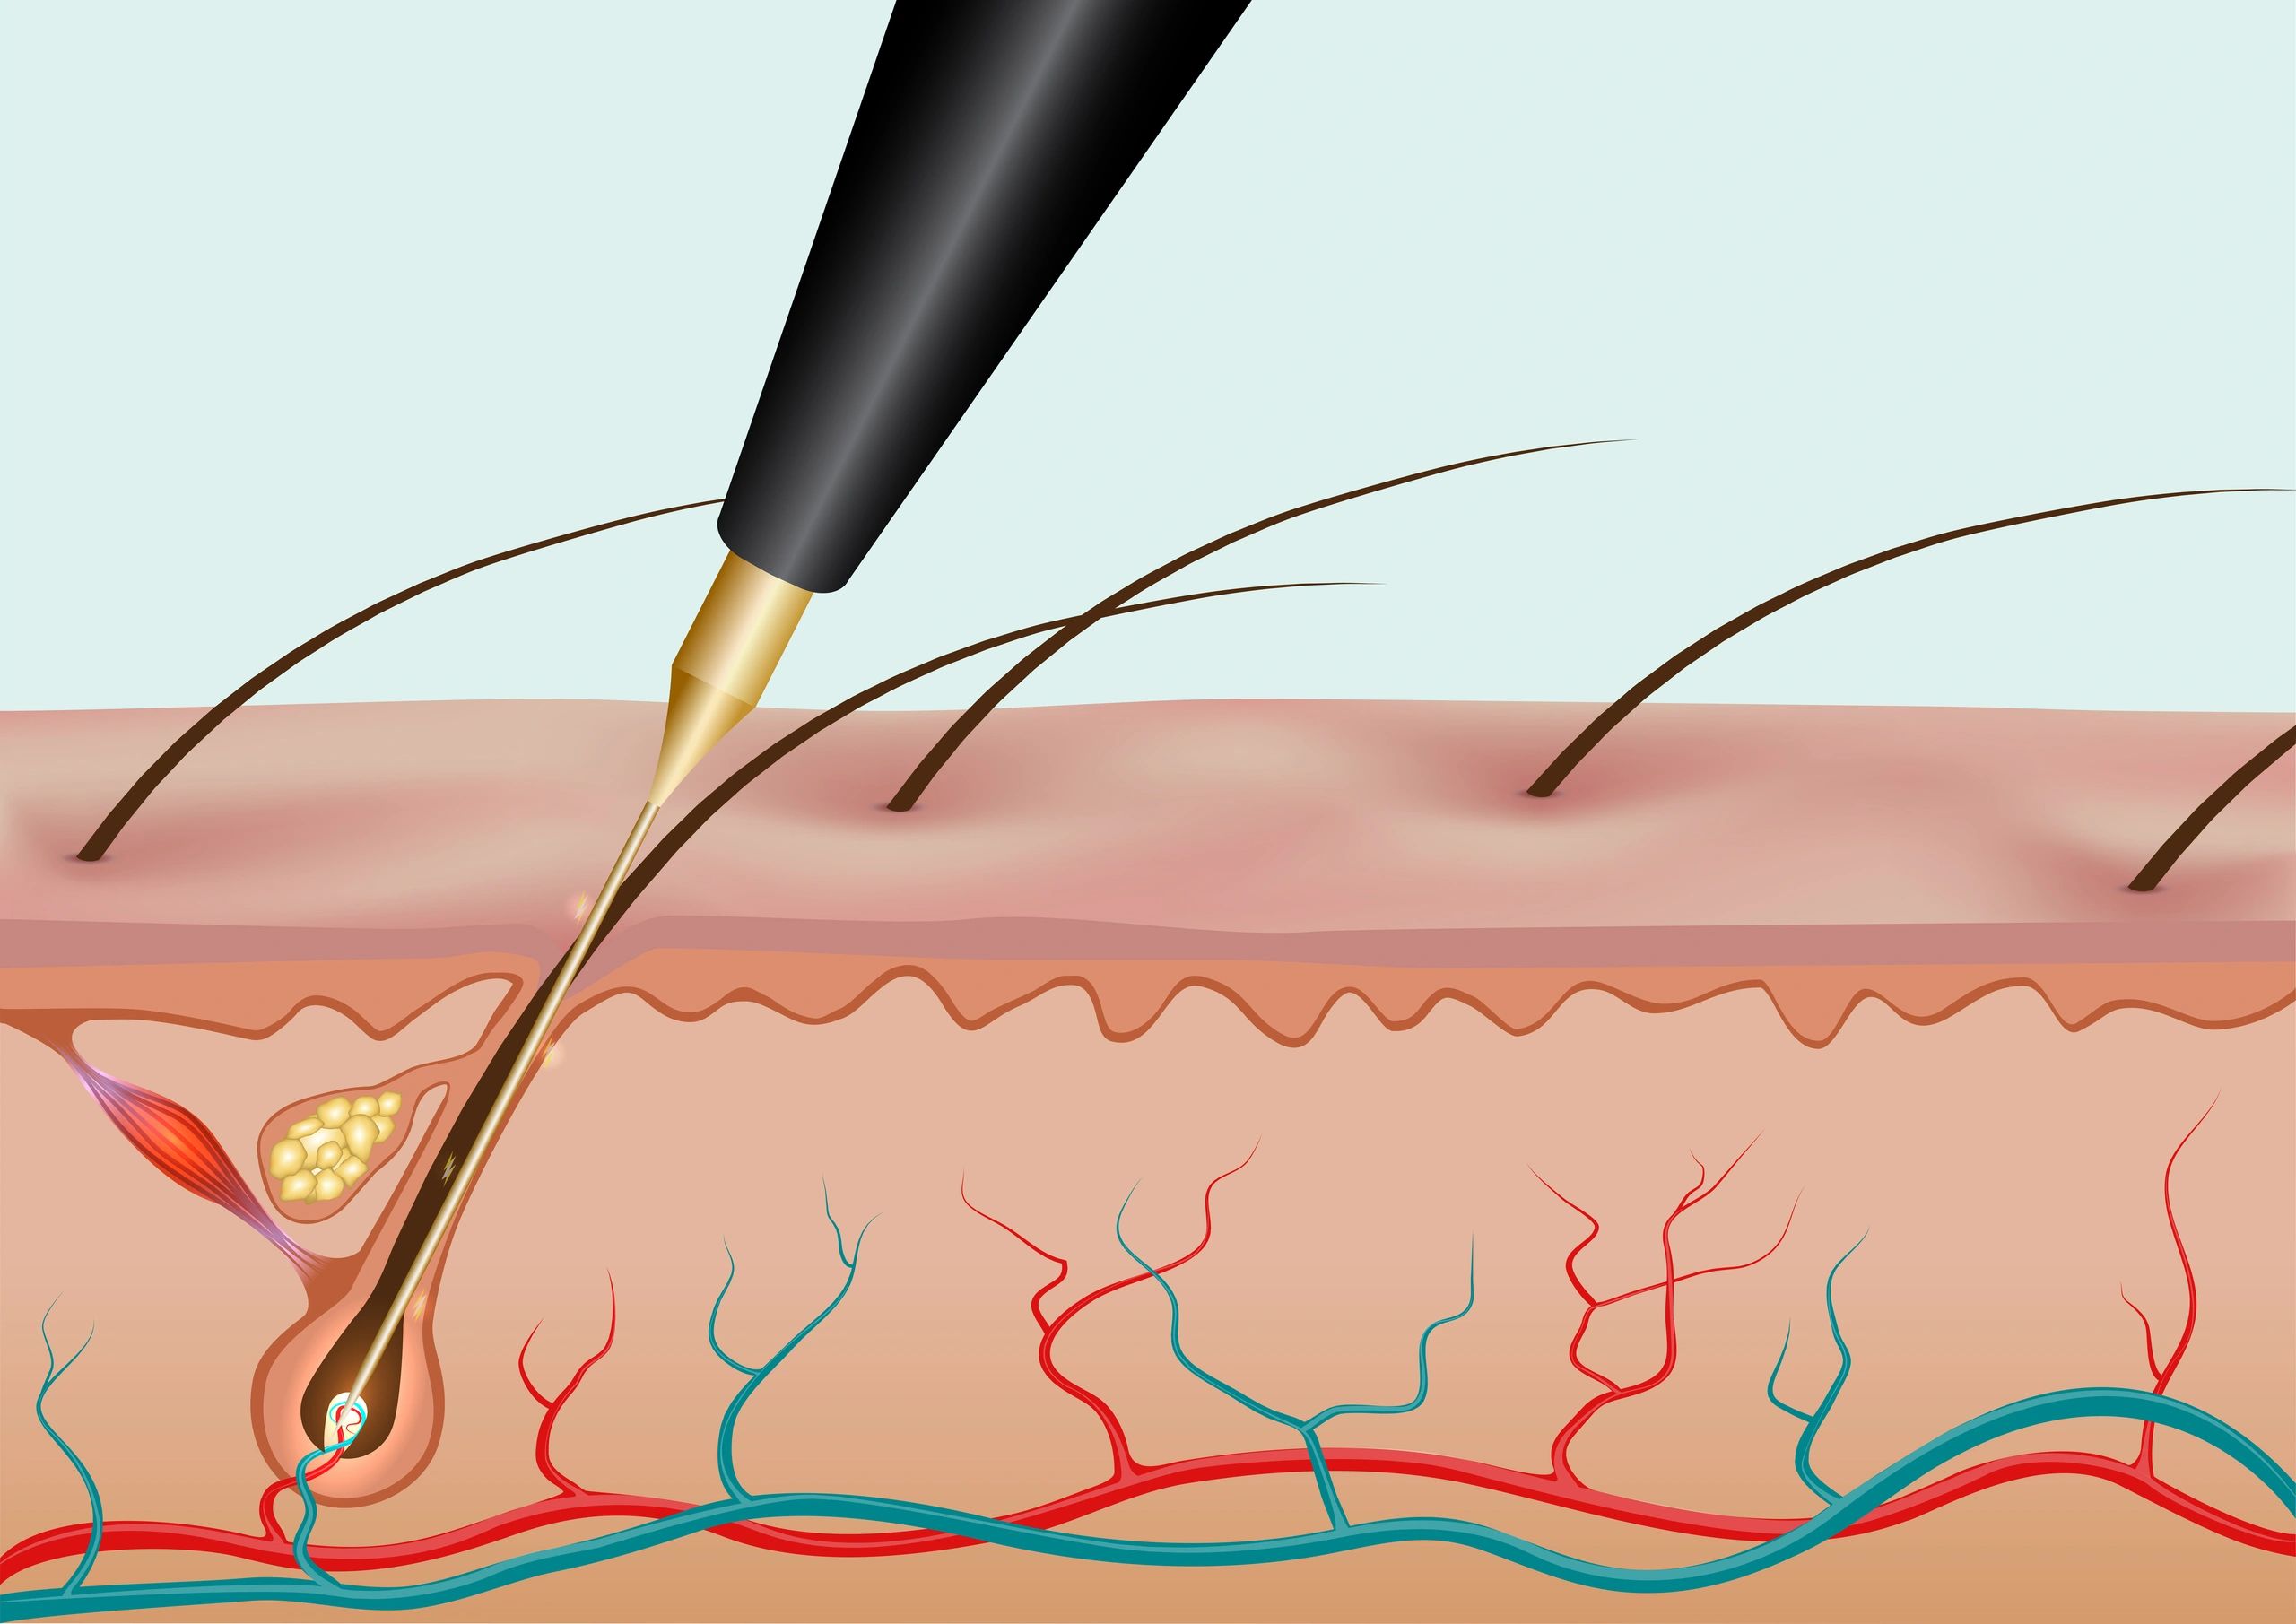 a close up of an Electrolysis probe being inserted into a hair follicle for permanent hair removal